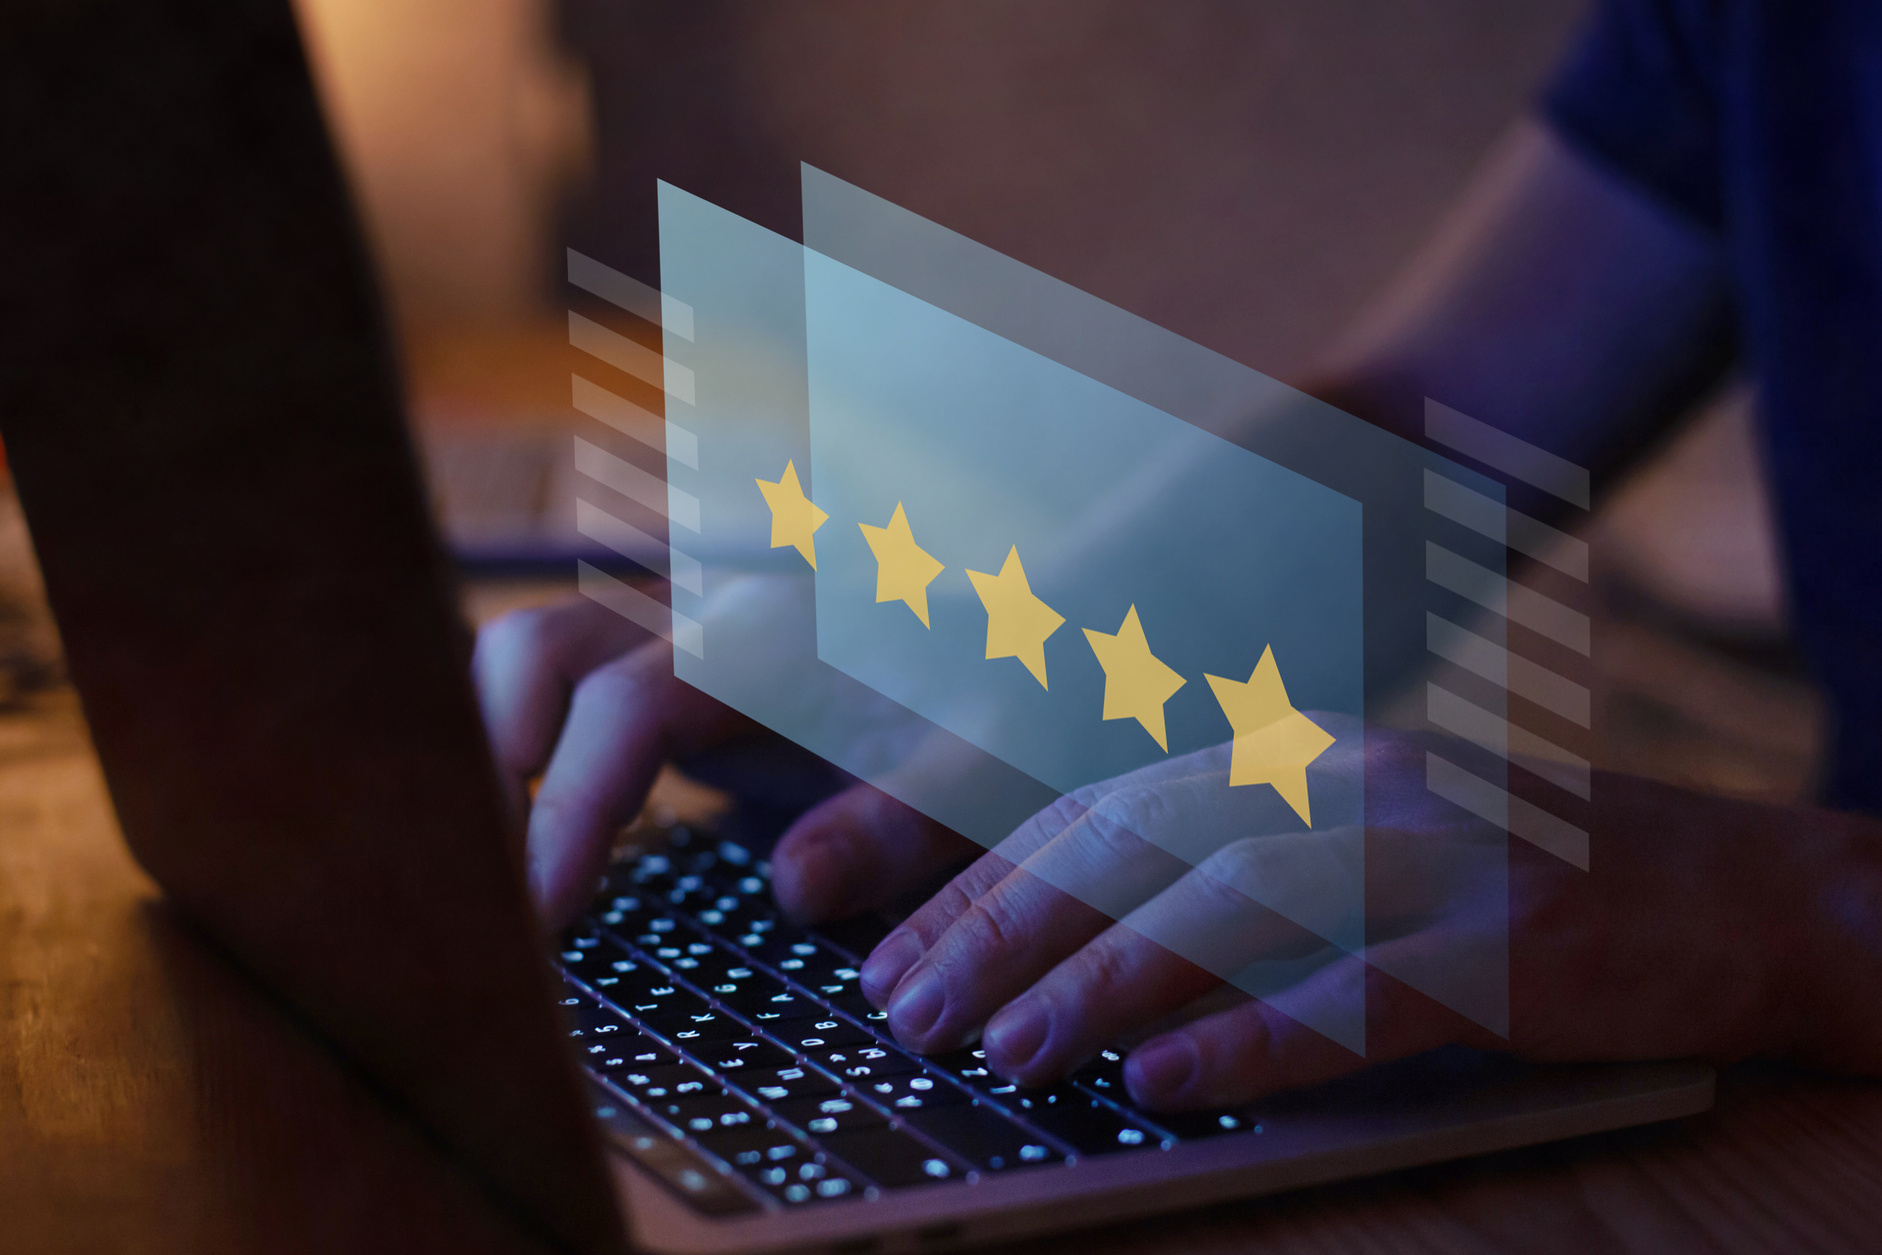 writing review on internet with 5 star rating, reputation management